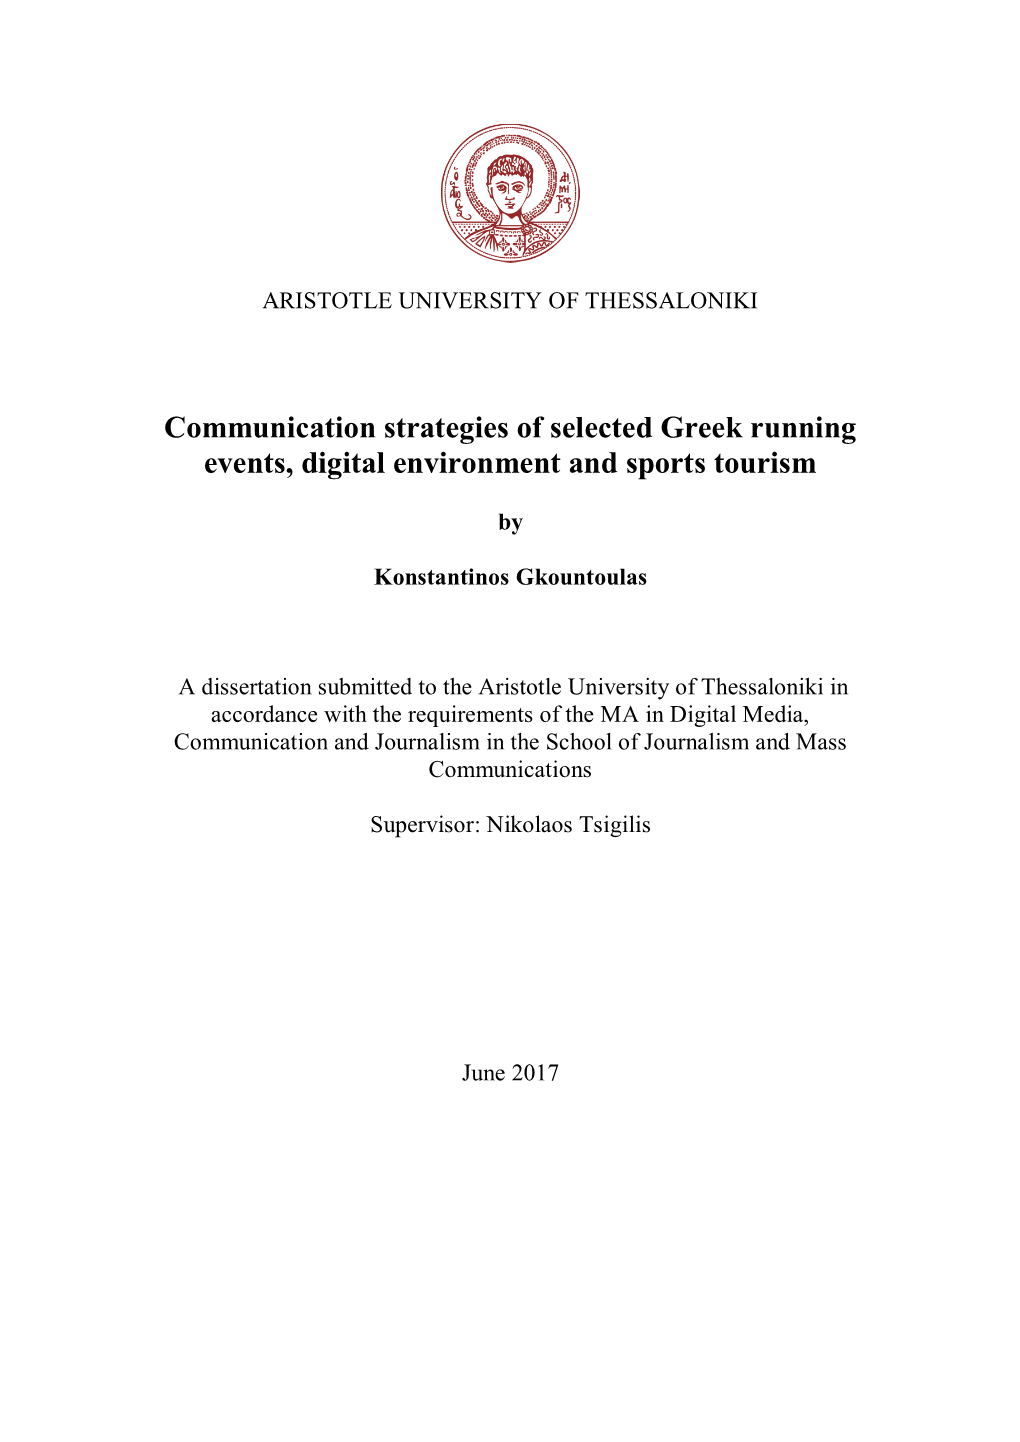 Communication Strategies of Selected Greek Running Events, Digital Environment and Sports Tourism